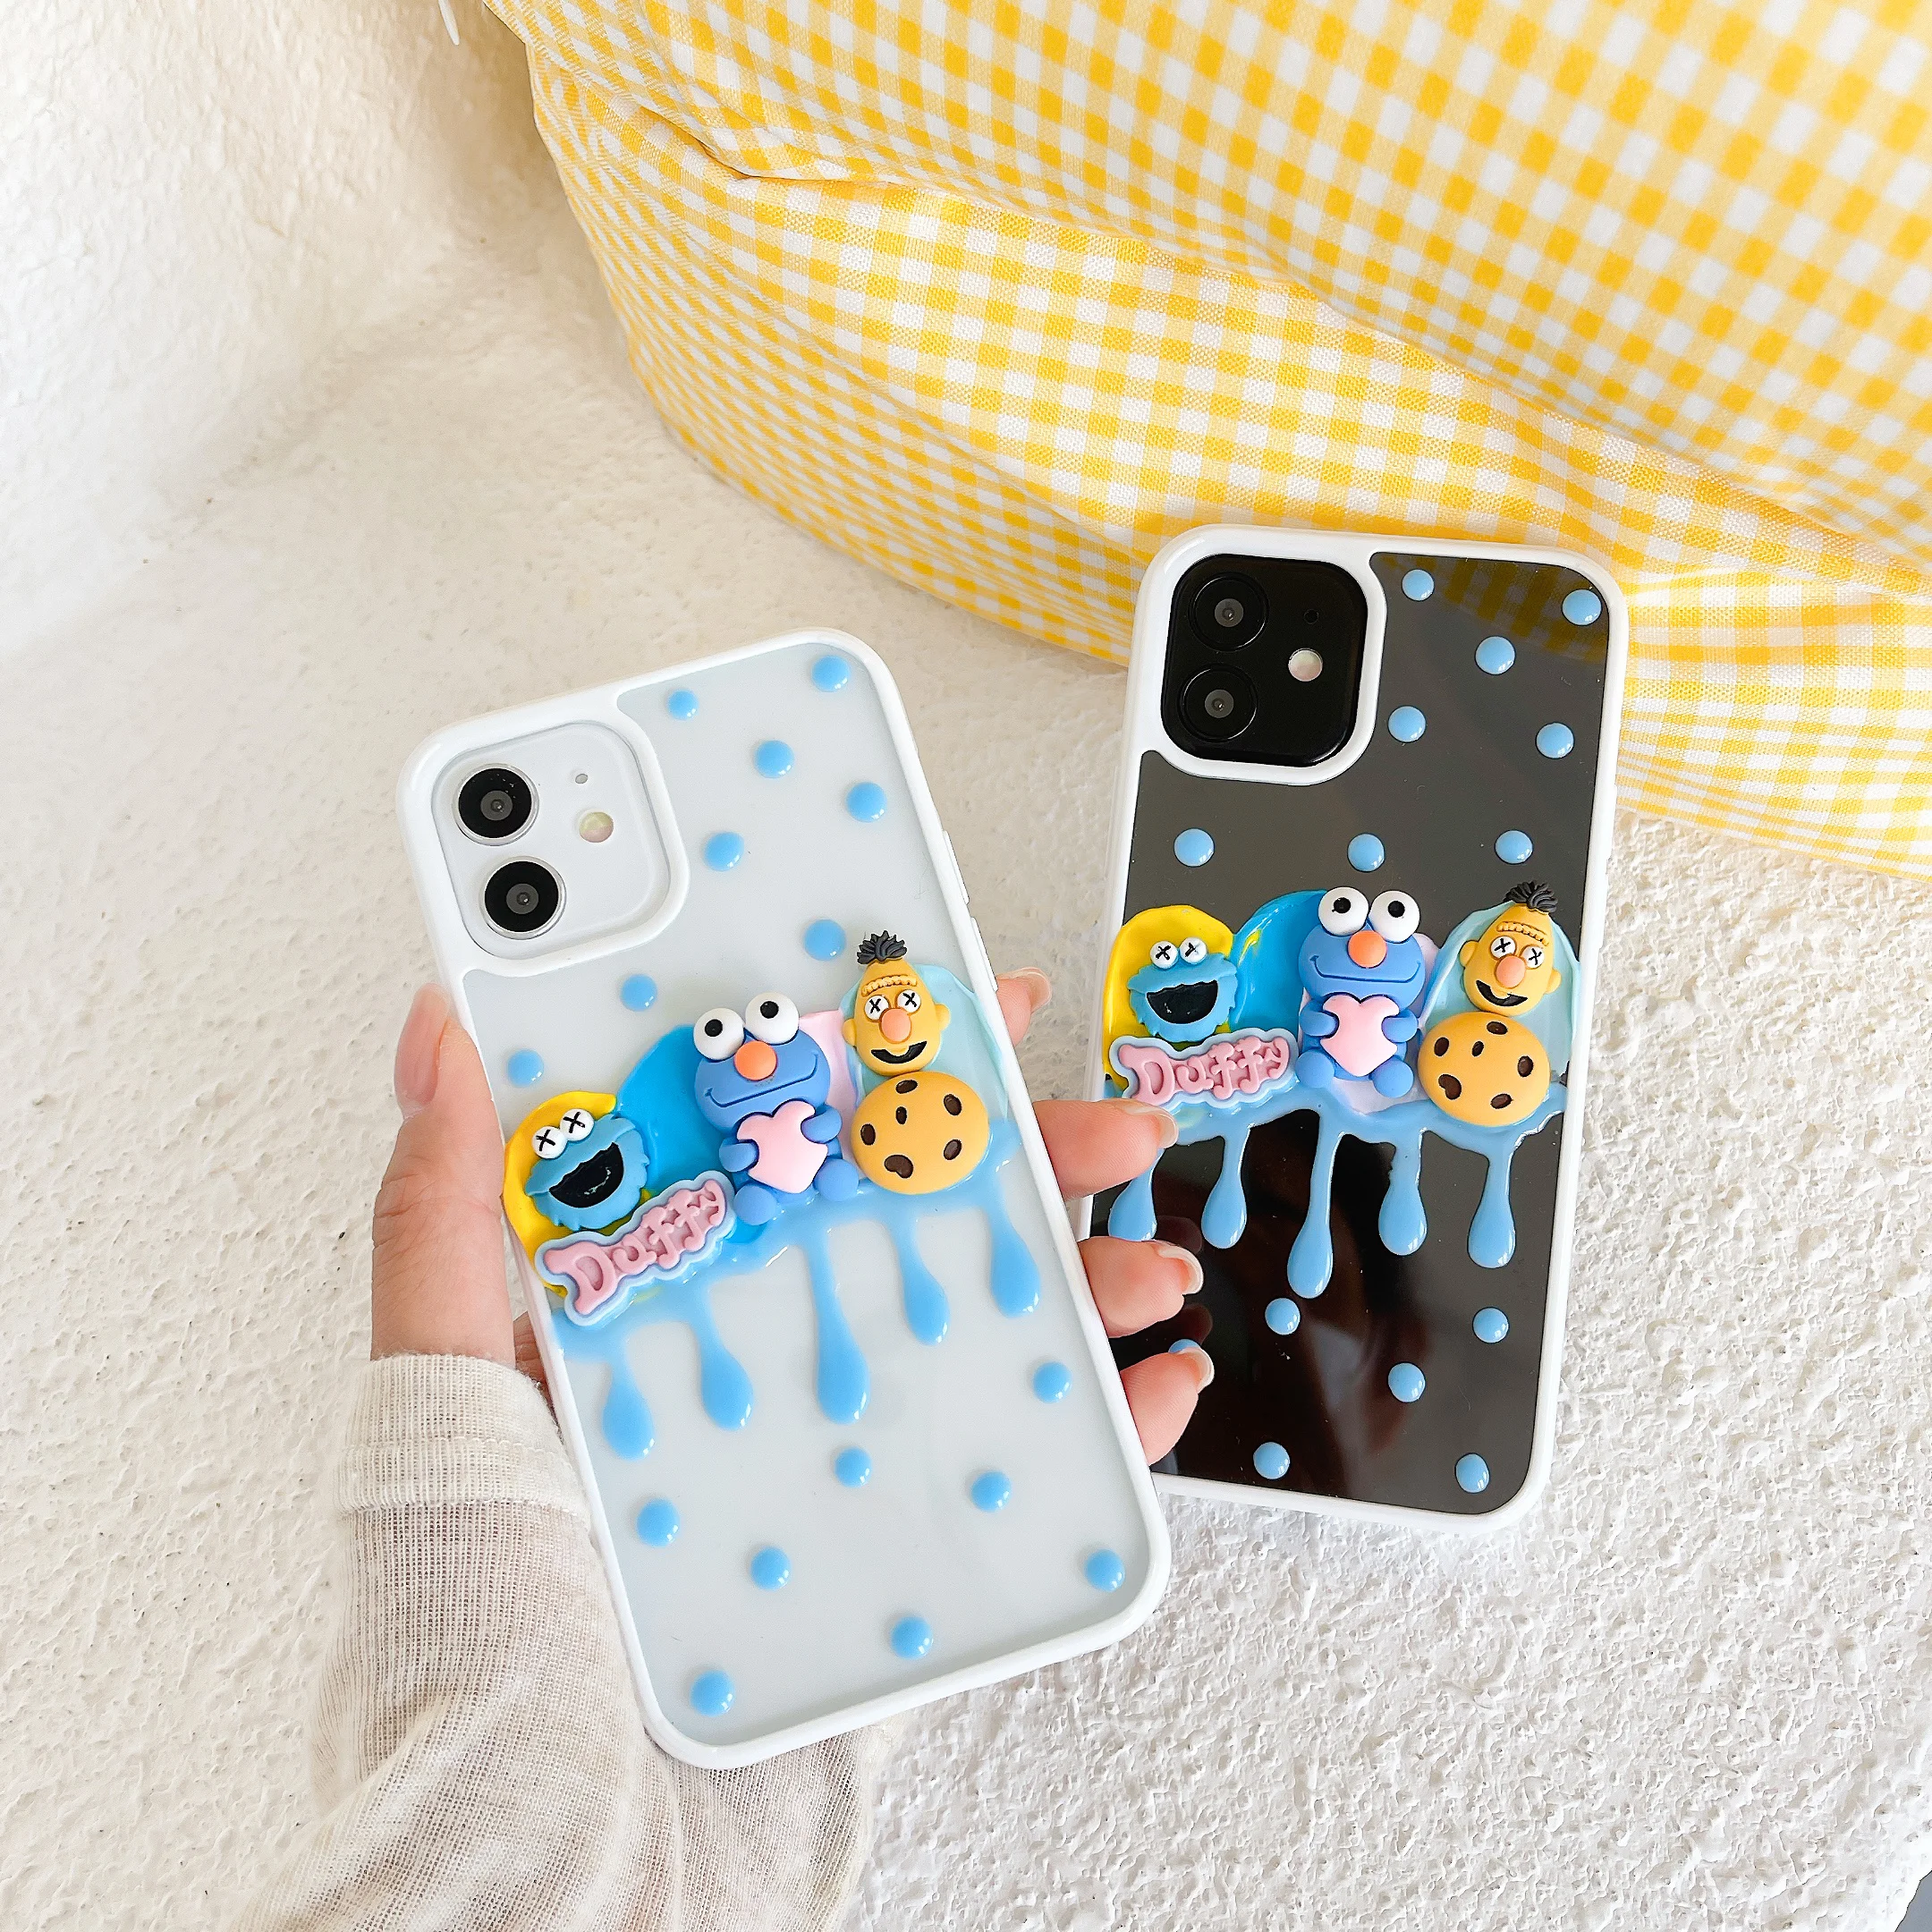 

3D Funny Cool Epoxy Glue Embossed Cookie Monster Designs Phone Case Cover For iPhone 12 Pro Max XR Xs Max 7 8 Plus